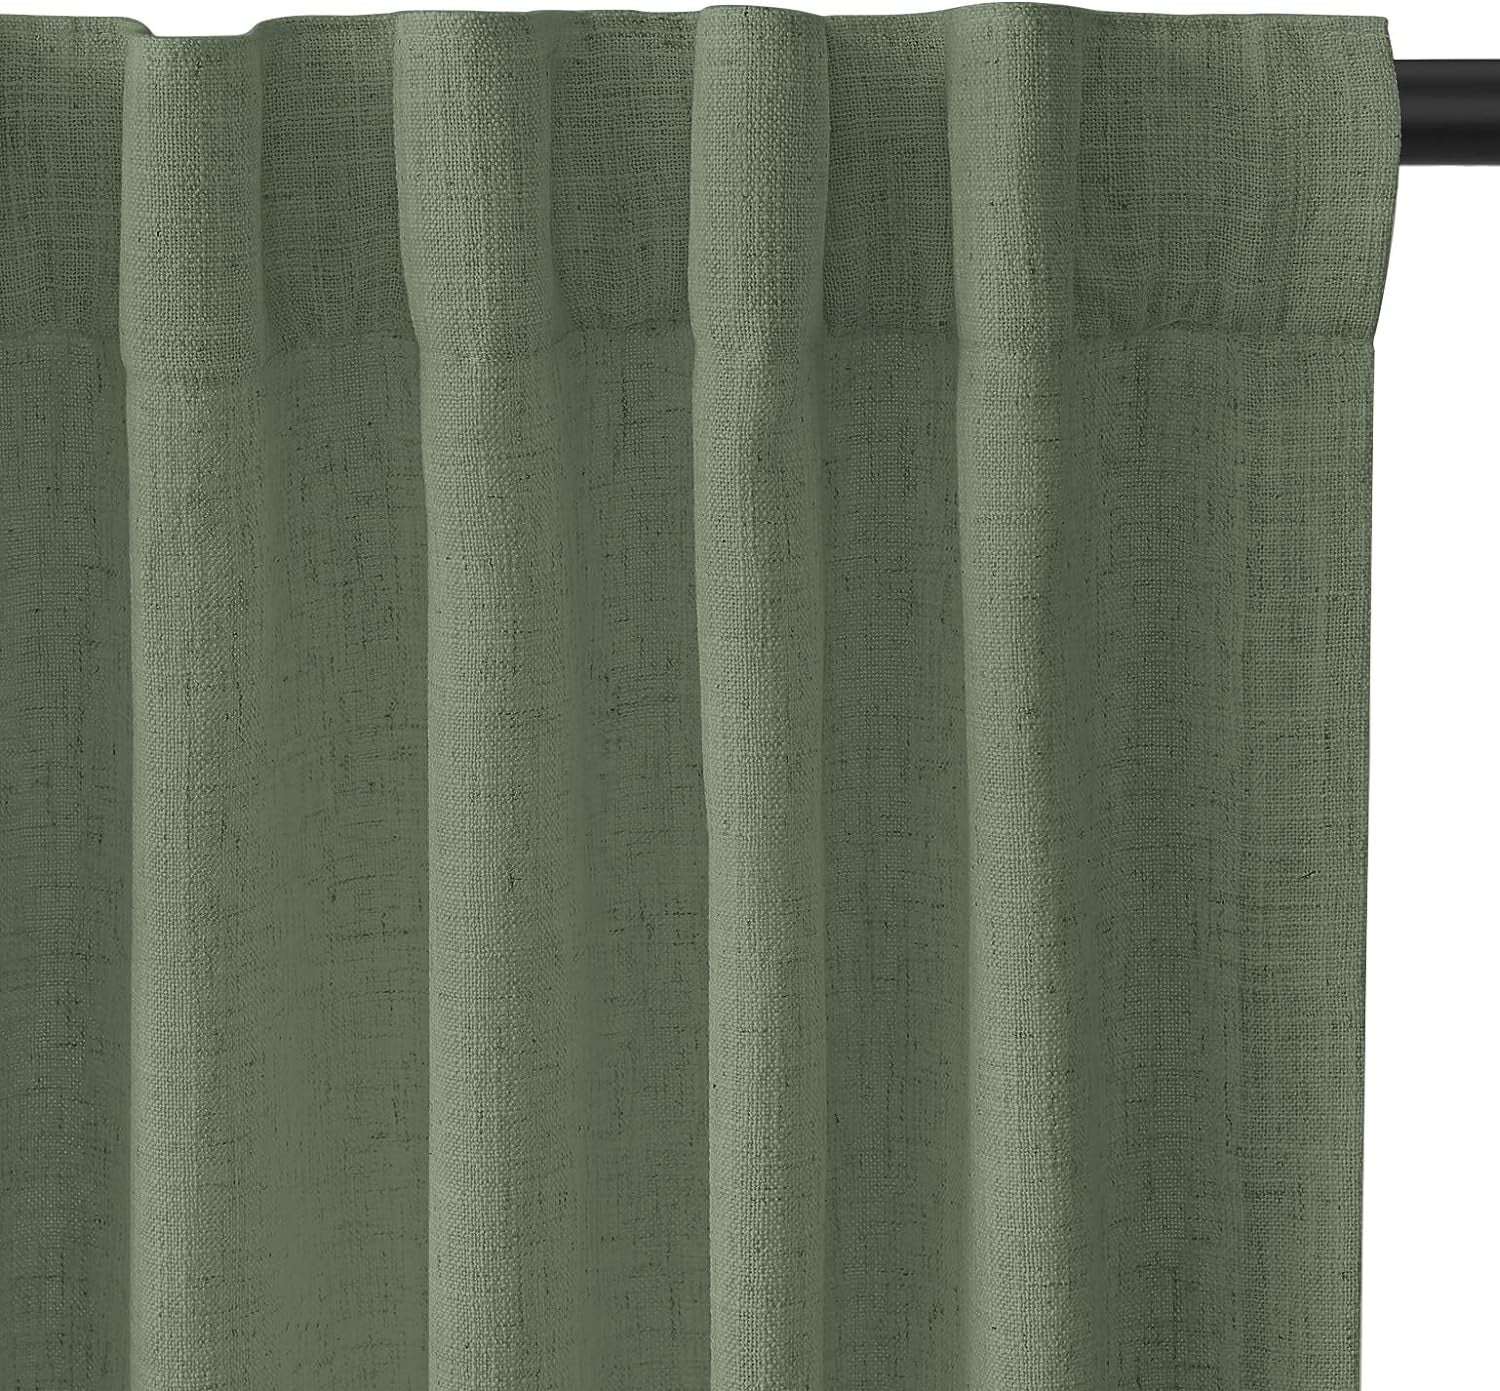 INOVADAY Beige White Linen Curtains 96 Inches Long for Living Room Bedroom, Back Tab Sheer Privacy Curtains 96 Inch Length 2 Panels, Light Filtering Farmhouse Curtains & Drapes Cream Colored, W50Xl96  INOVADAY 09 Sagegreen 50"W X96"L 